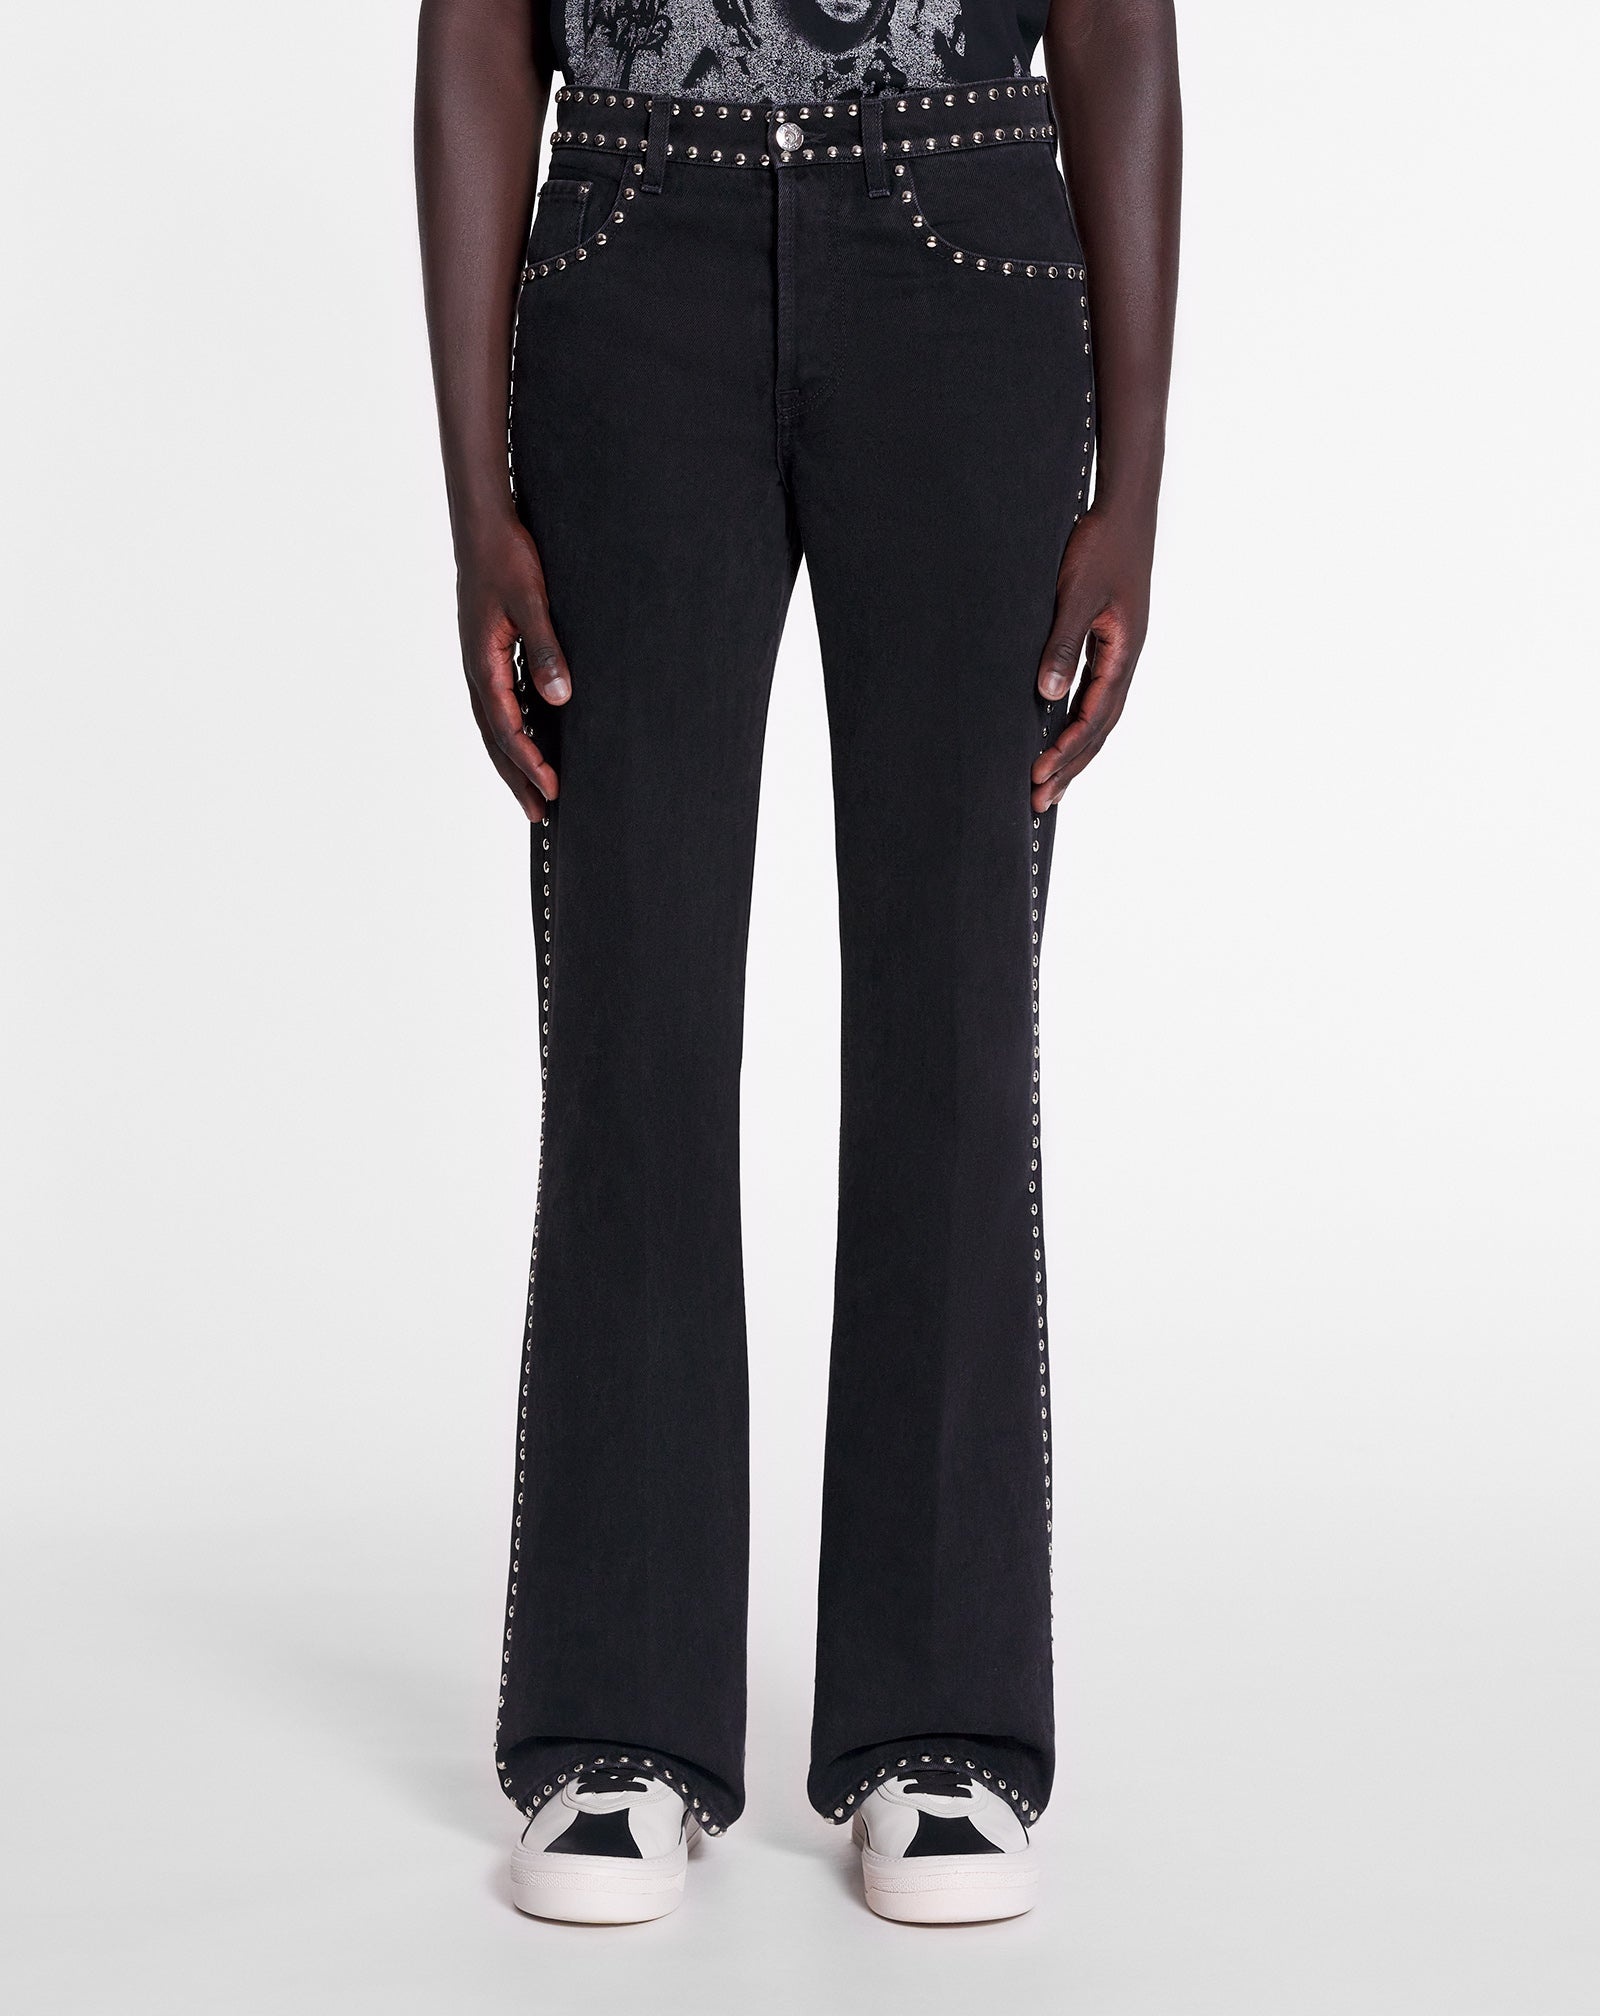 LANVIN X FUTURE STUDDED FLARED PANTS FOR MEN - 3